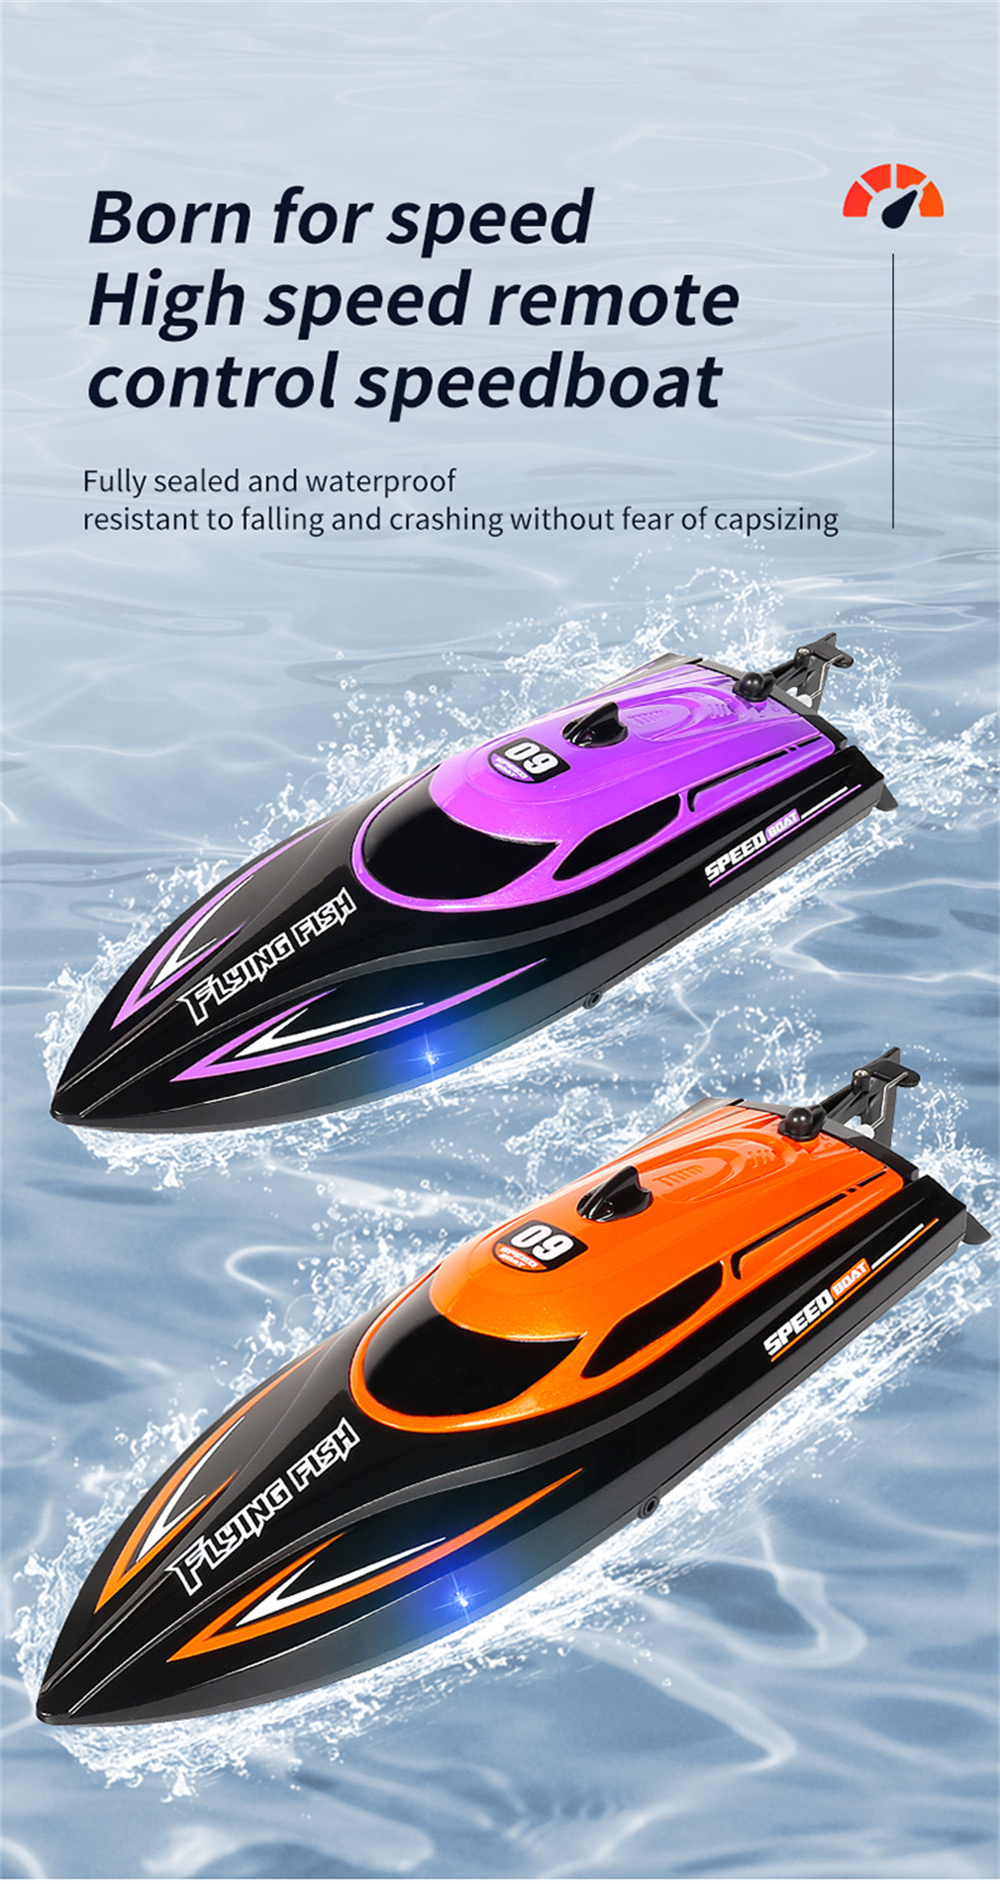 HXJRC HJ812 2.4G 4CH RC Boat High Speed LED Light Speedboat Waterproof 25km/h Electric Racing Vehicles Models Lakes Pools Remote Control Toys